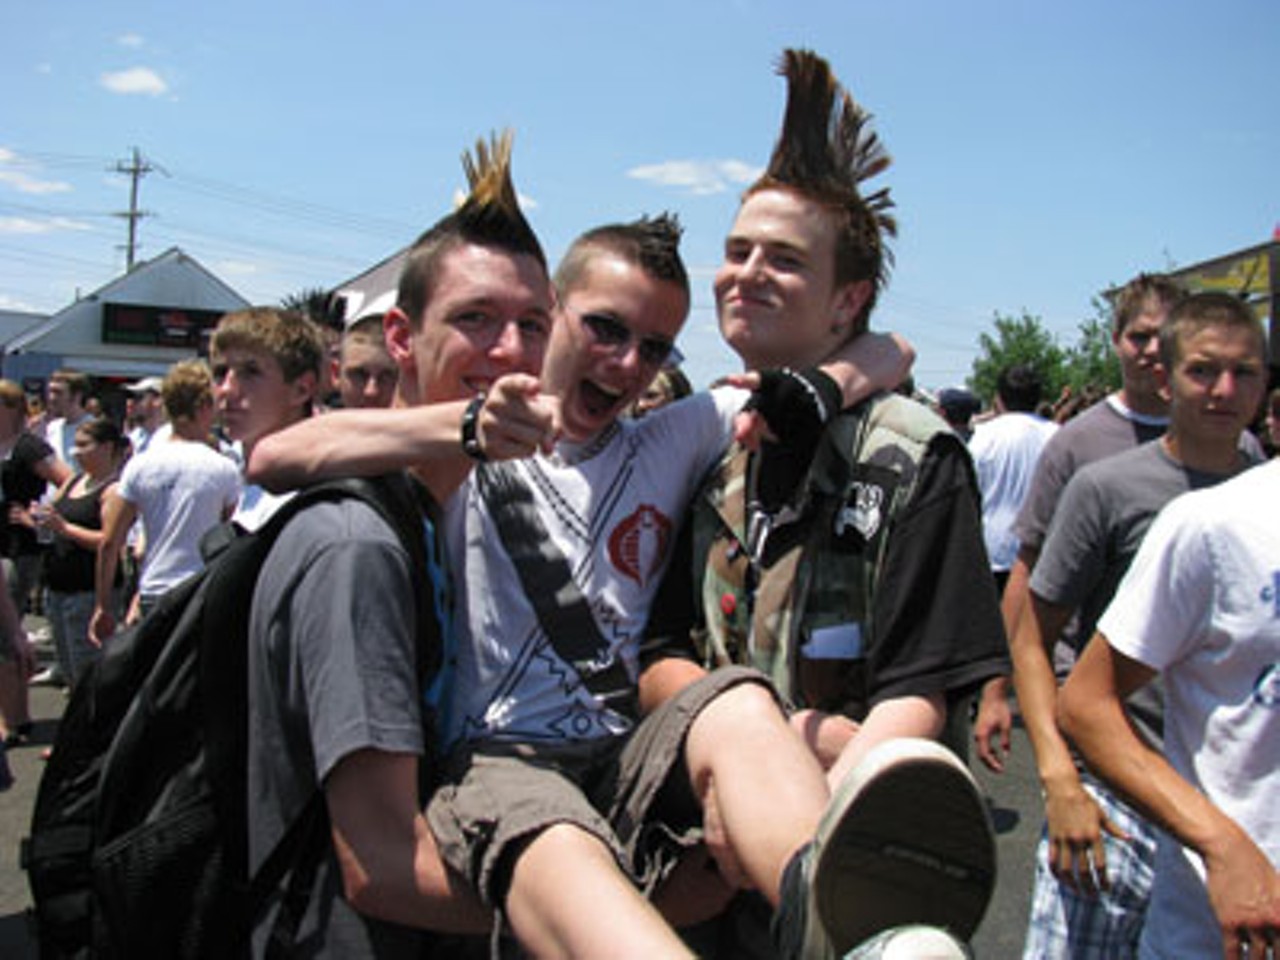 One wonders how these dudes managed to get their Mohawks to keep from wilting in the heat. Temps hovered near 90. I hear modeling glue, toothpaste and a lot -- a lot -- of AquaNet helps.